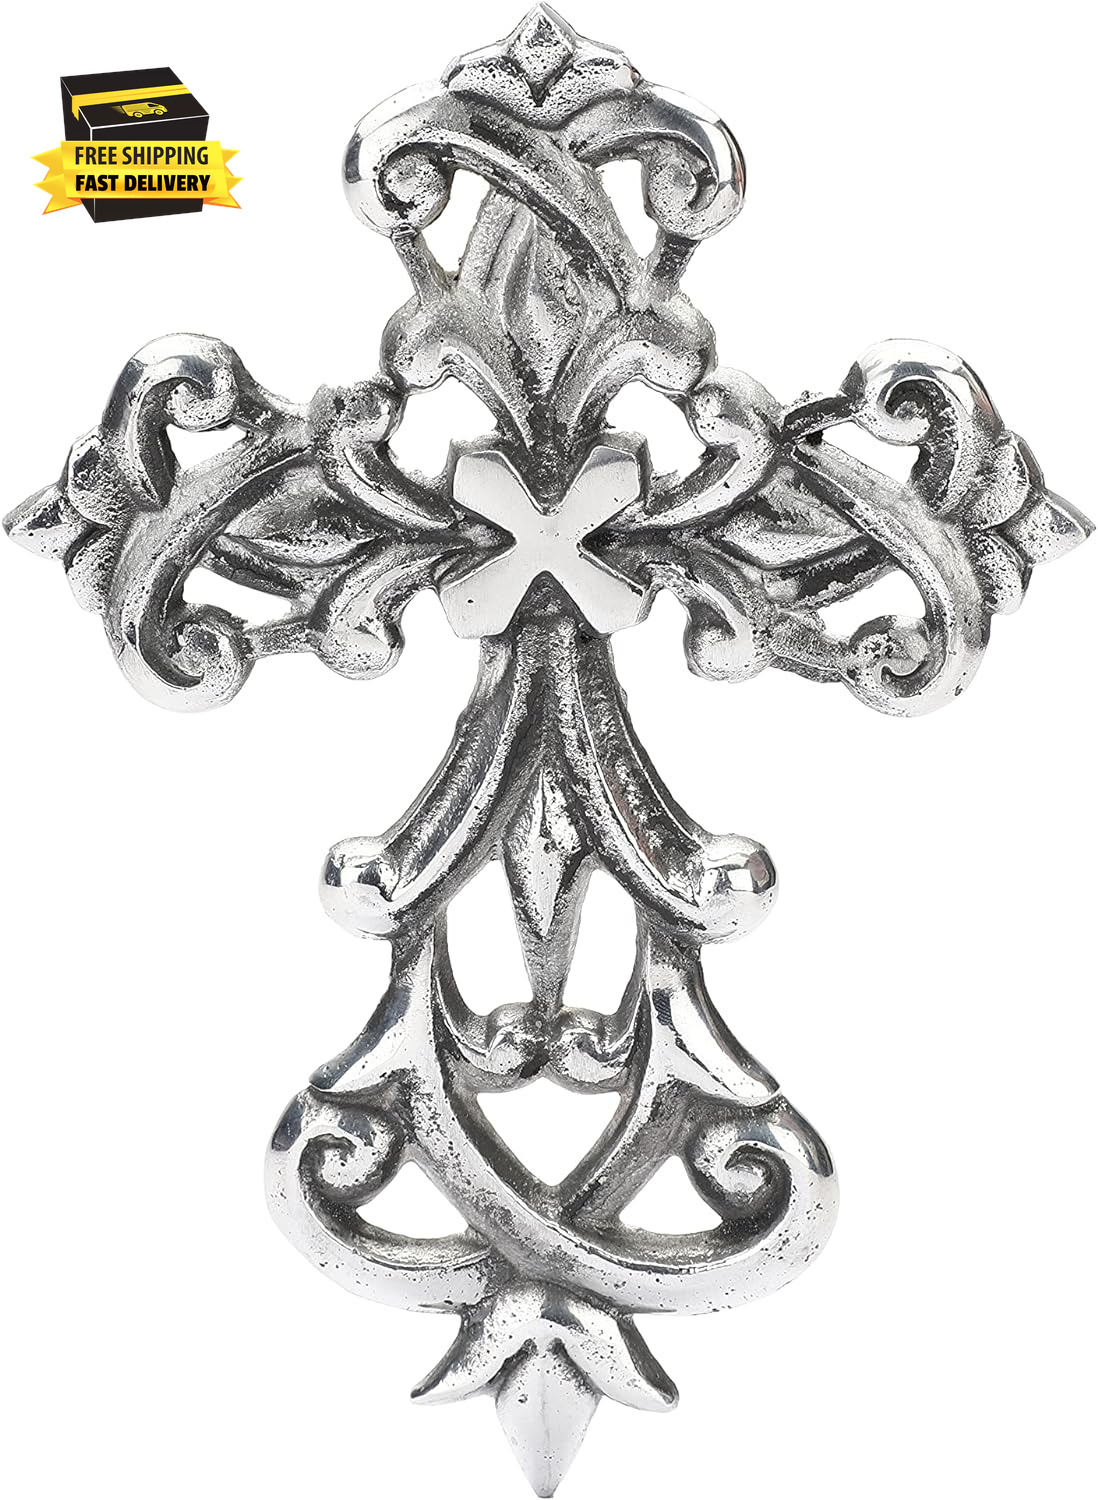 8.5 Inch Decorative Wall Cross Metal Decorations for Home.Religious Metal Hangin